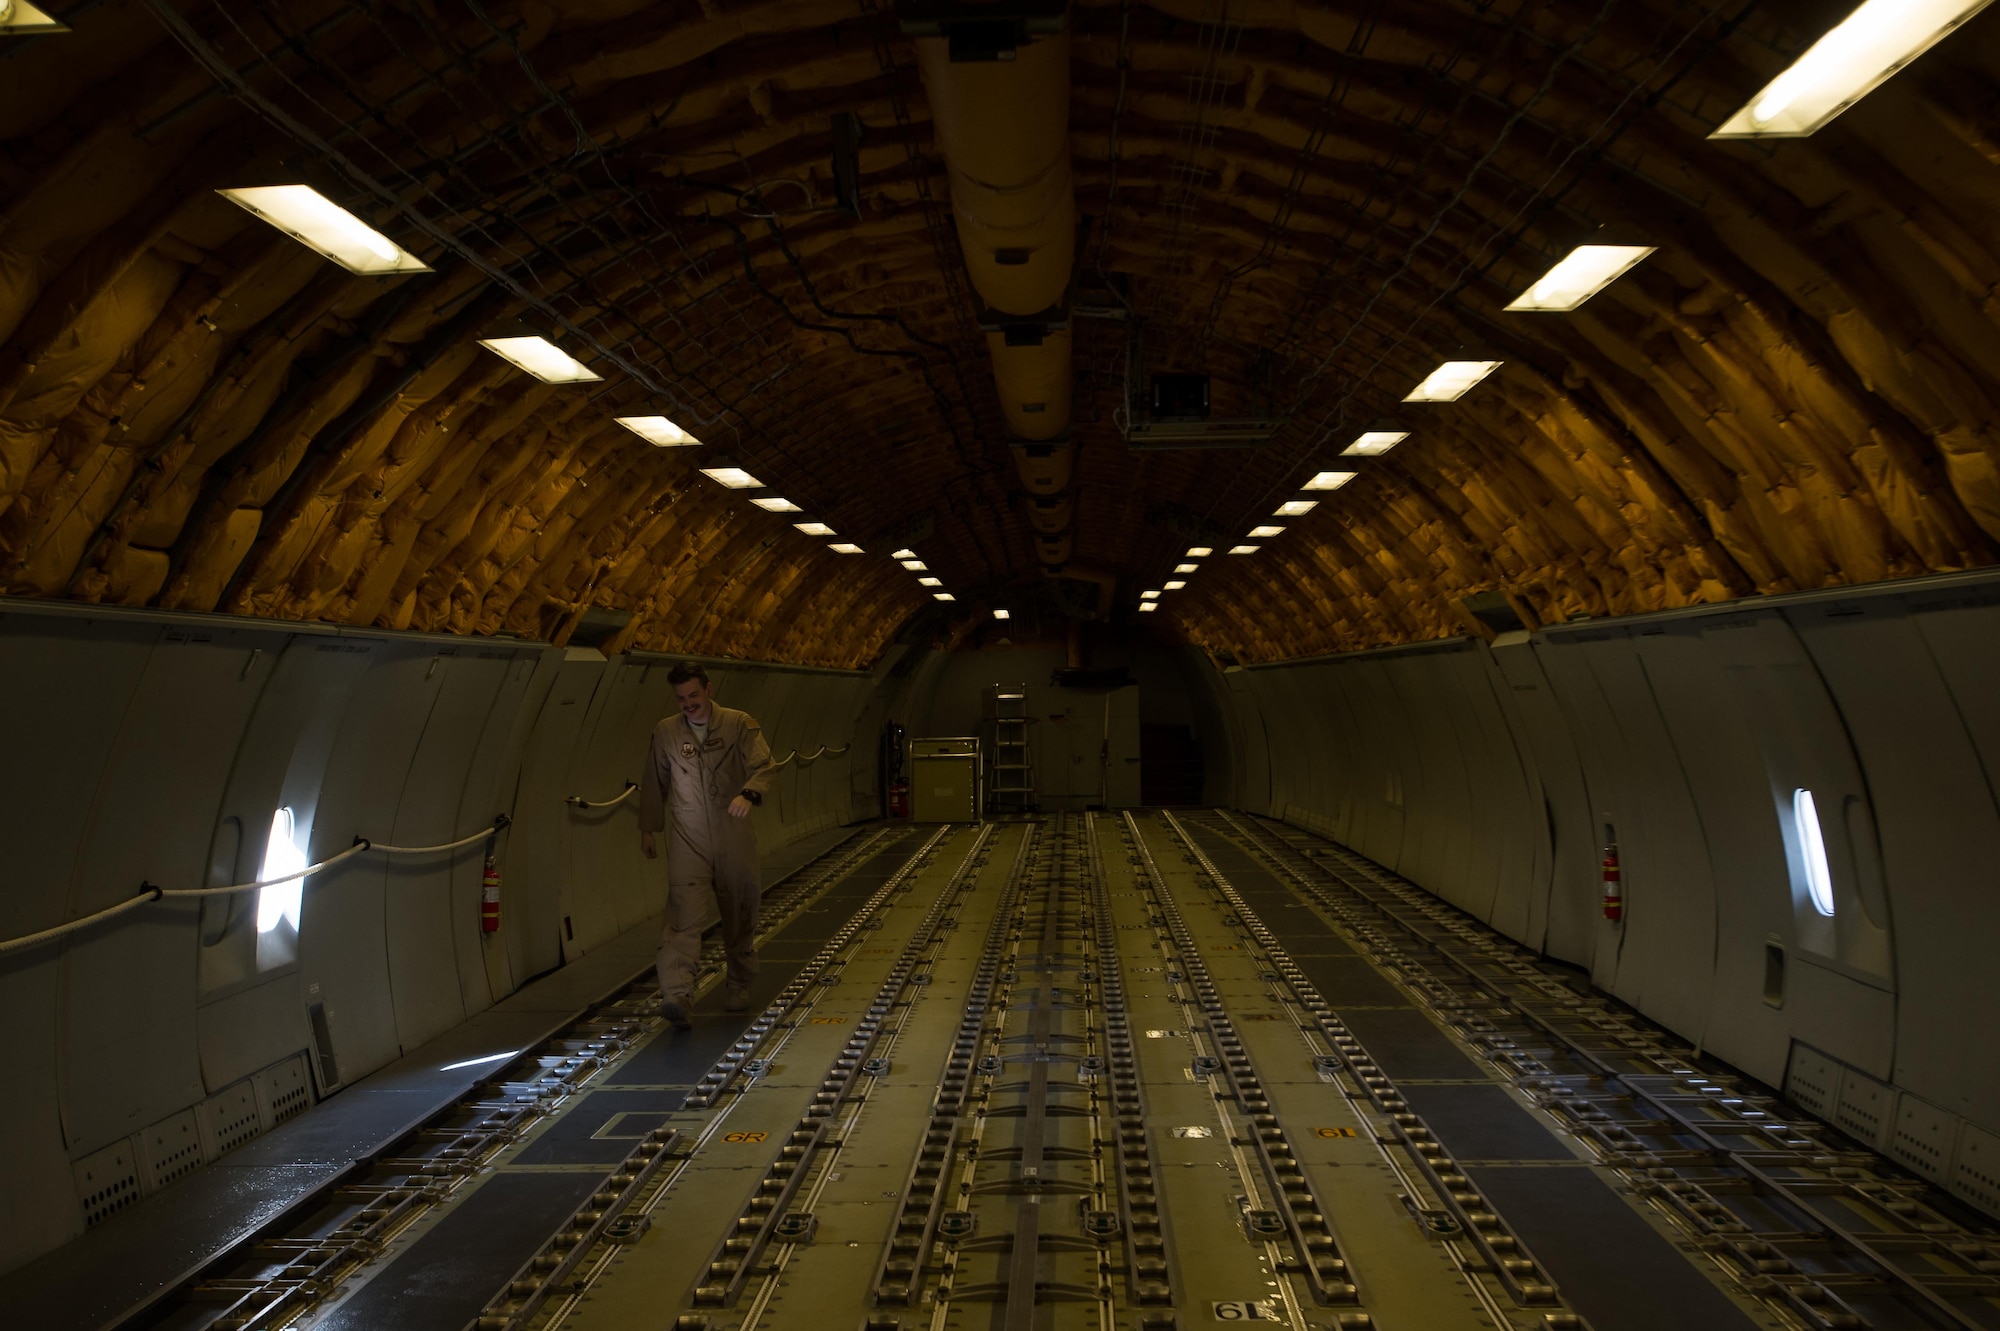 A 380th Air Expeditionary Wing KC-10 Extender boom operator Senior Airman Grant walks toward the cockpit after completing a preflight inspection in the boom pod at an undisclosed location in Southwest Asia, Dec. 25, 2016. 380 AEW KC-10 boom operators have successfully offloaded fuel to more than 5,000 Coalition receivers in support of Combined Joint Task Force-Operation Inherent Resolve since Oct. 2016. (U.S. Air Force photo/Senior Airman Tyler Woodward)